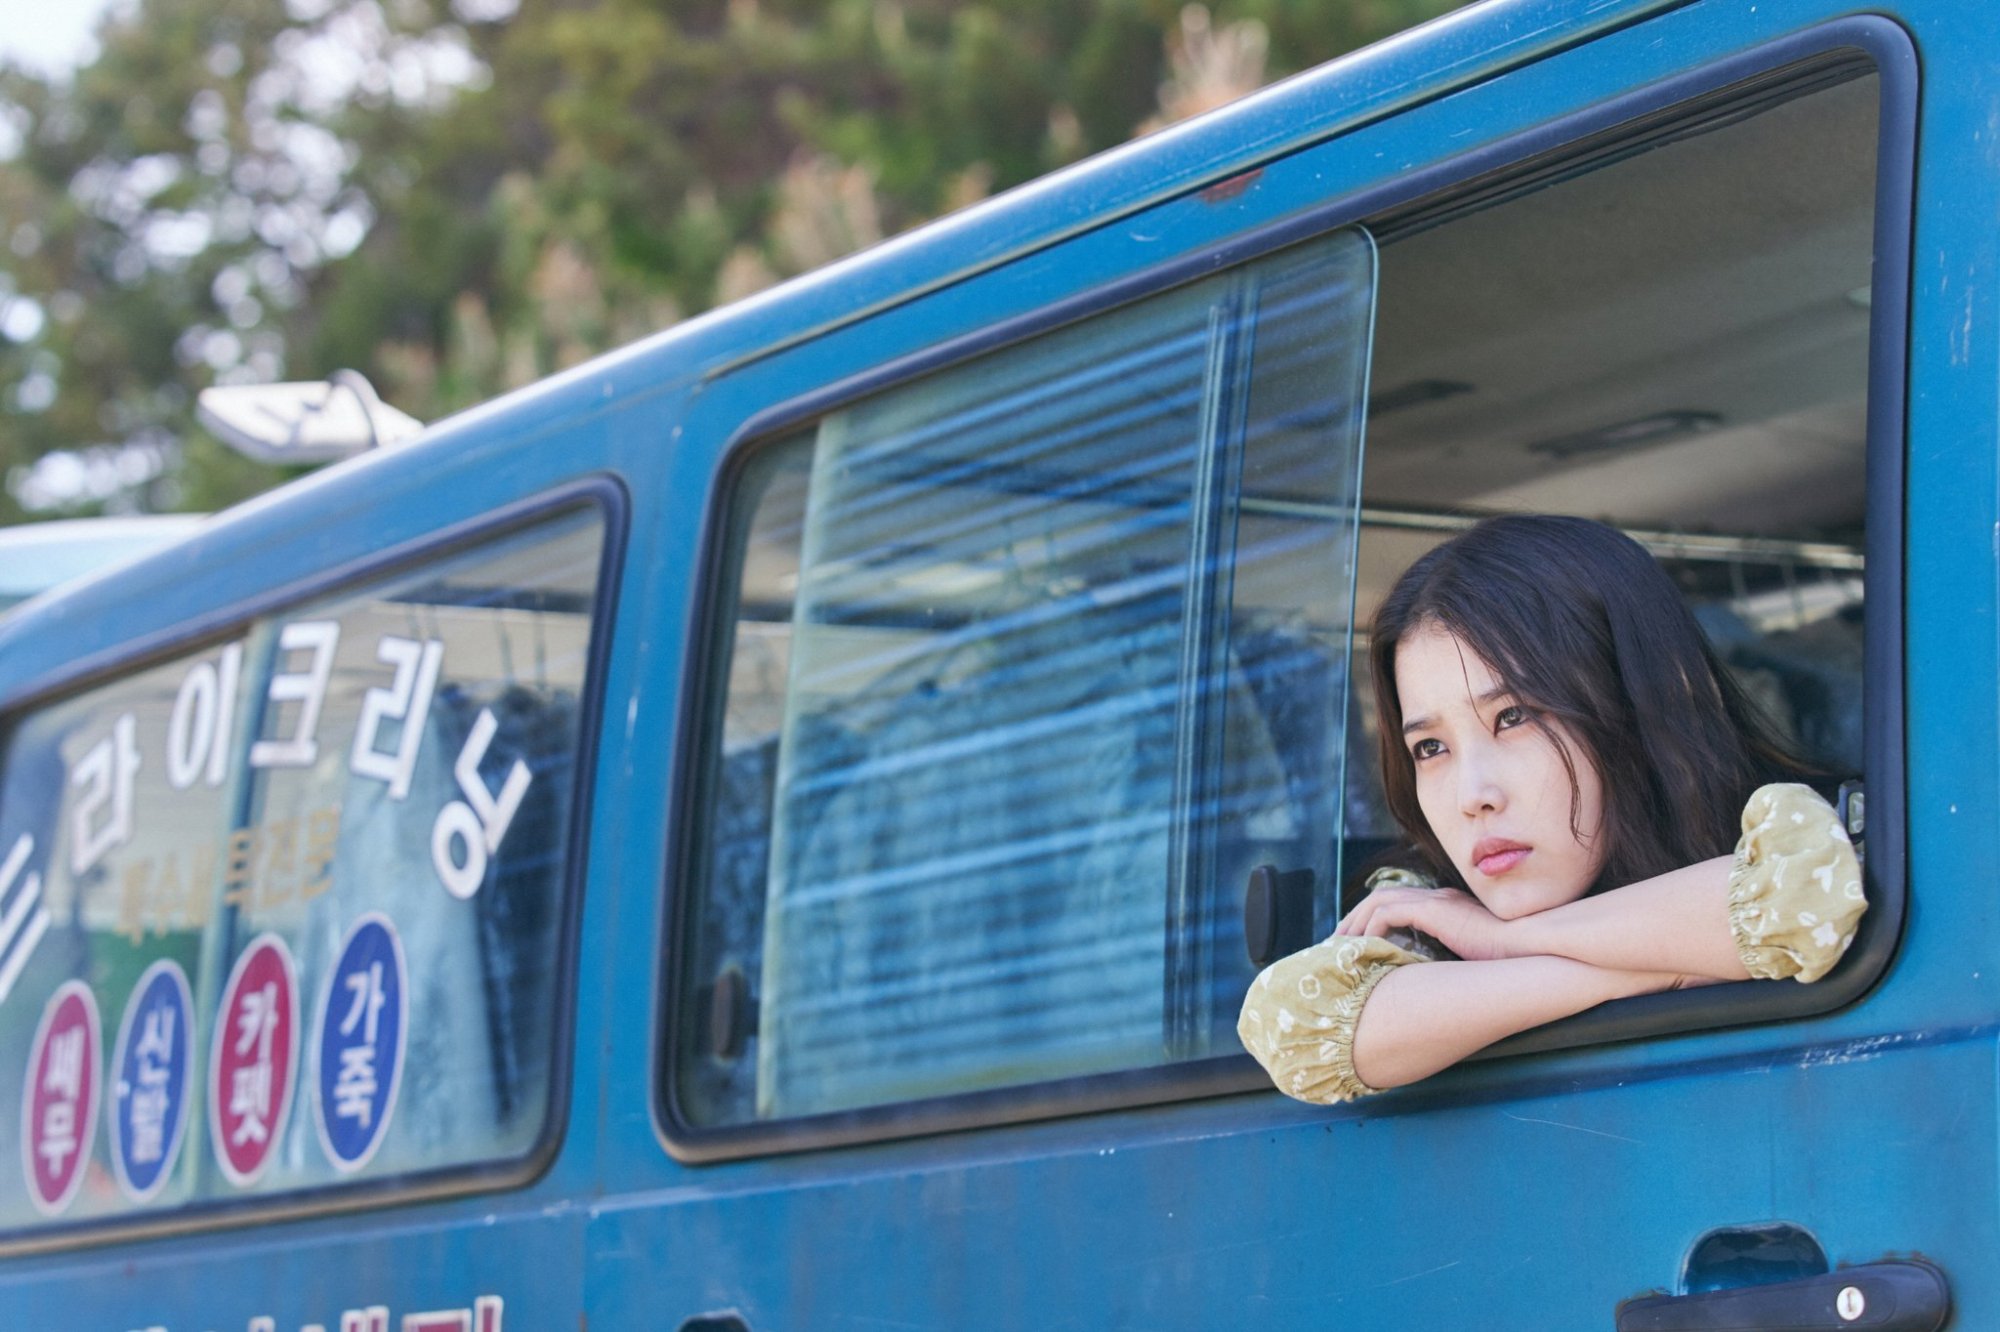 'Broker' Lee Ji-eun as So-young with her arms resting on the edge of an opened van window from the inside